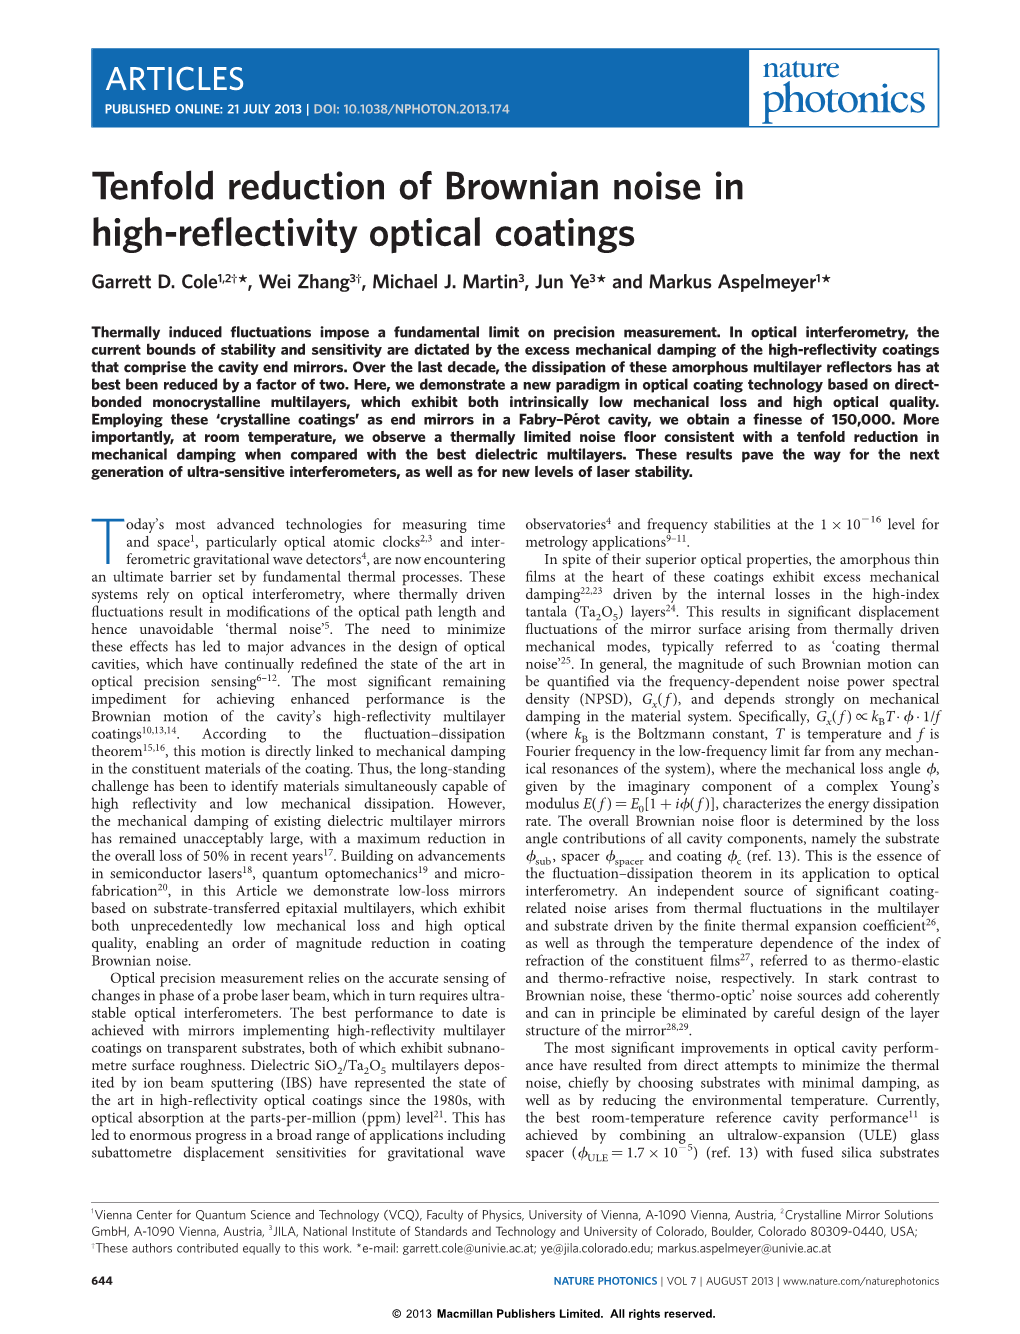 Tenfold Reduction of Brownian Noise in High-Reflectivity Optical Coatings